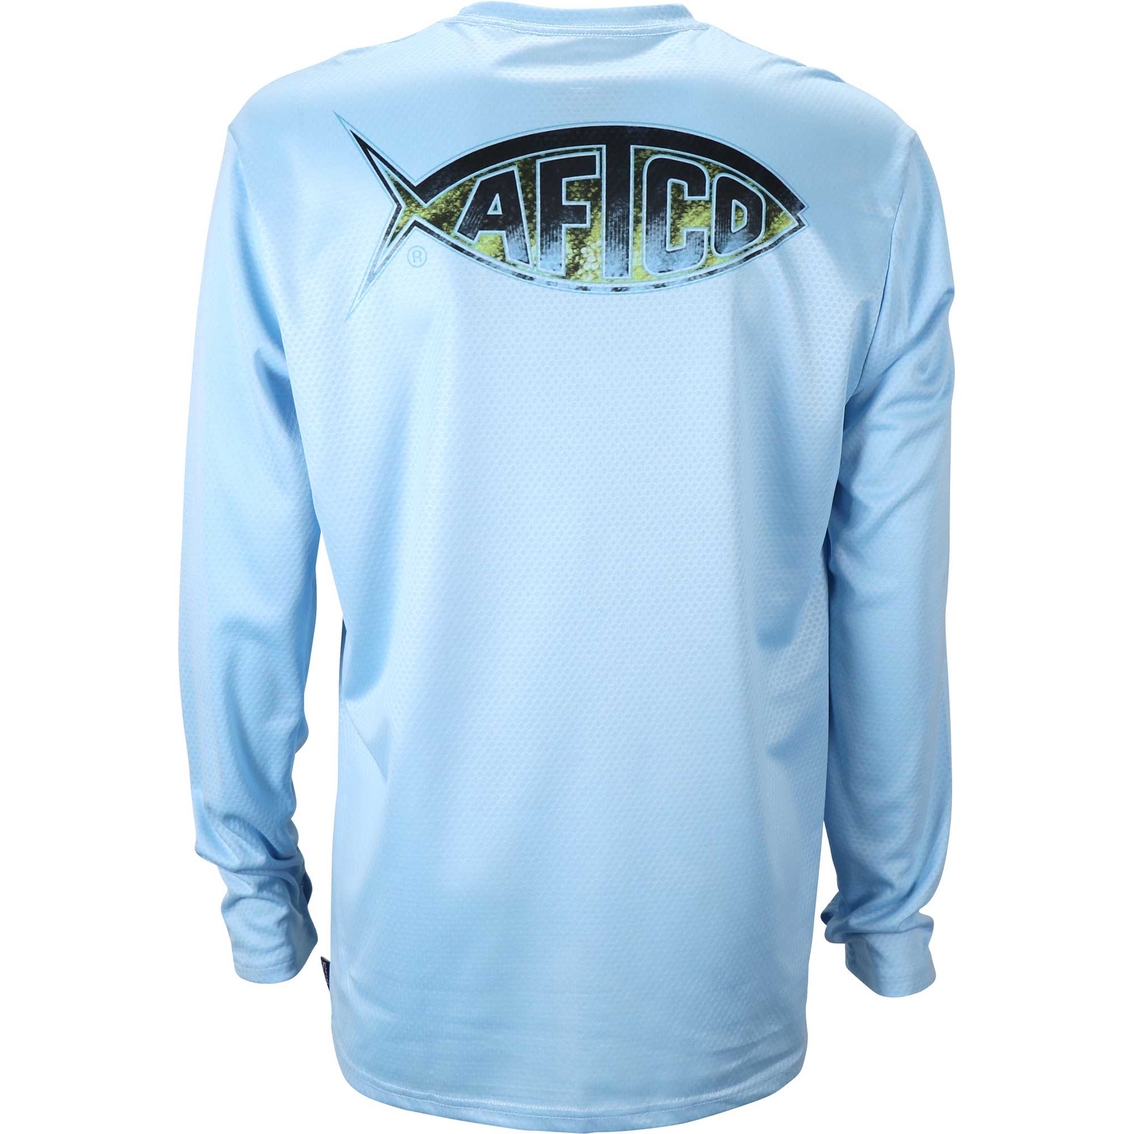 Aftco Yapper Performance Shirt, Shirts, Clothing & Accessories